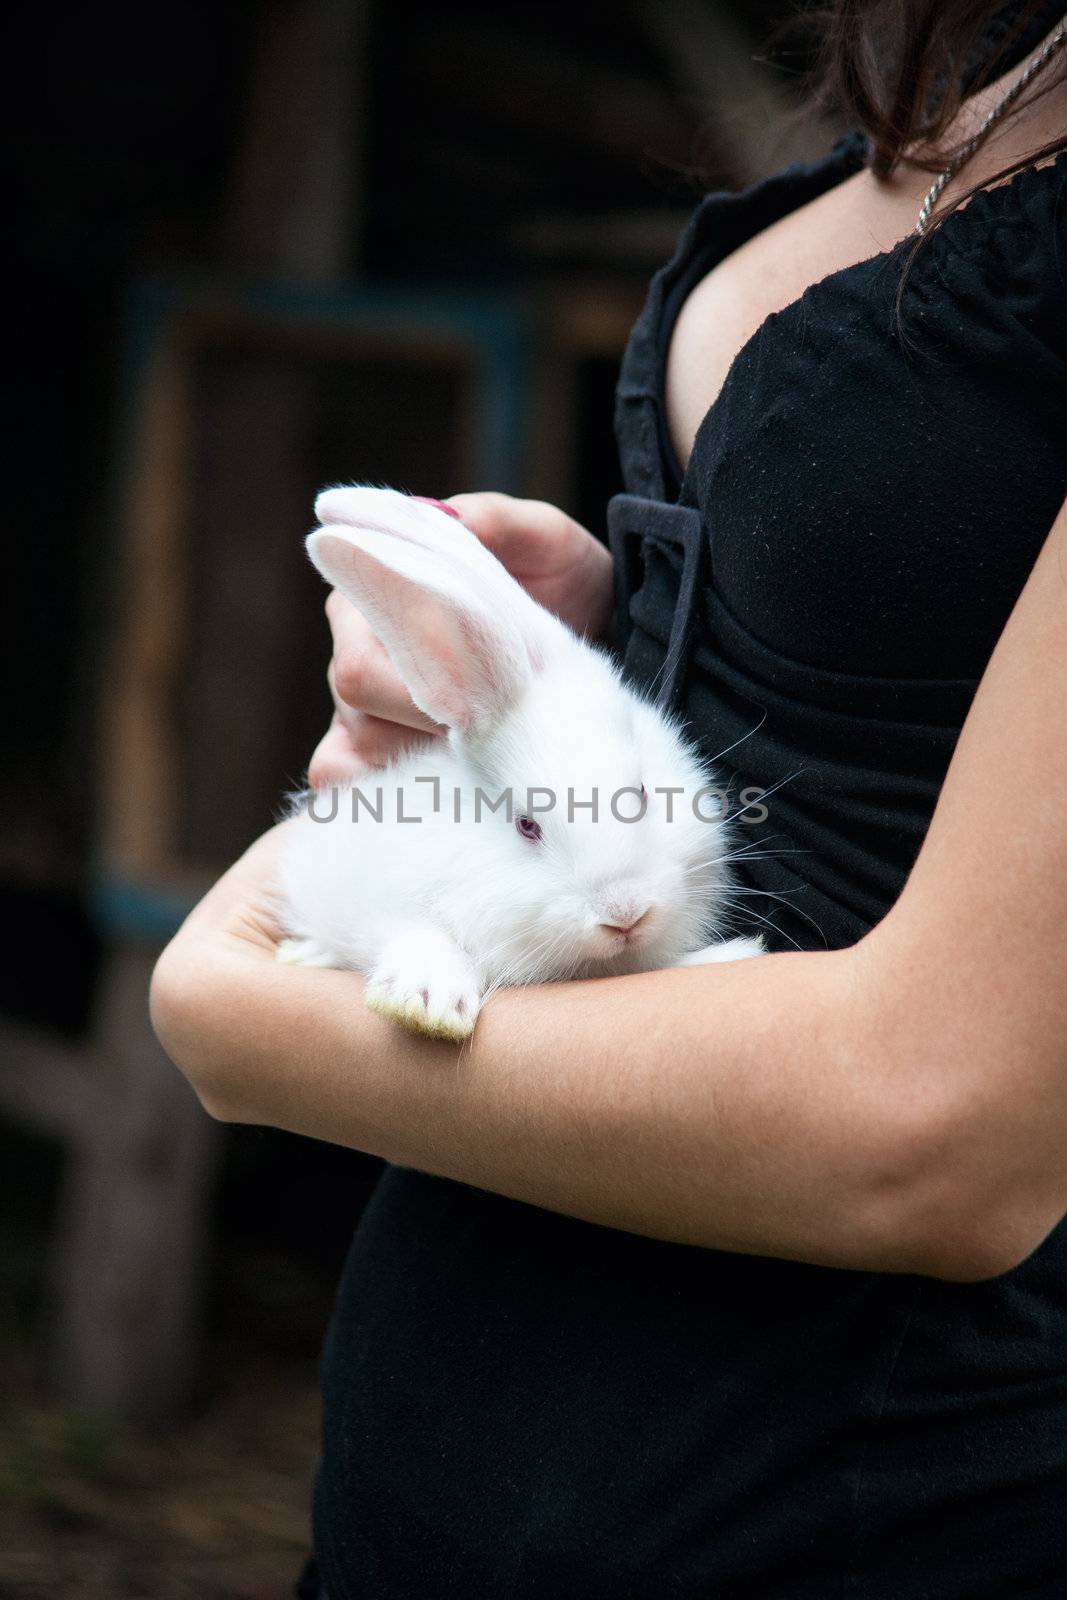 Rabbit in the hands of the girl